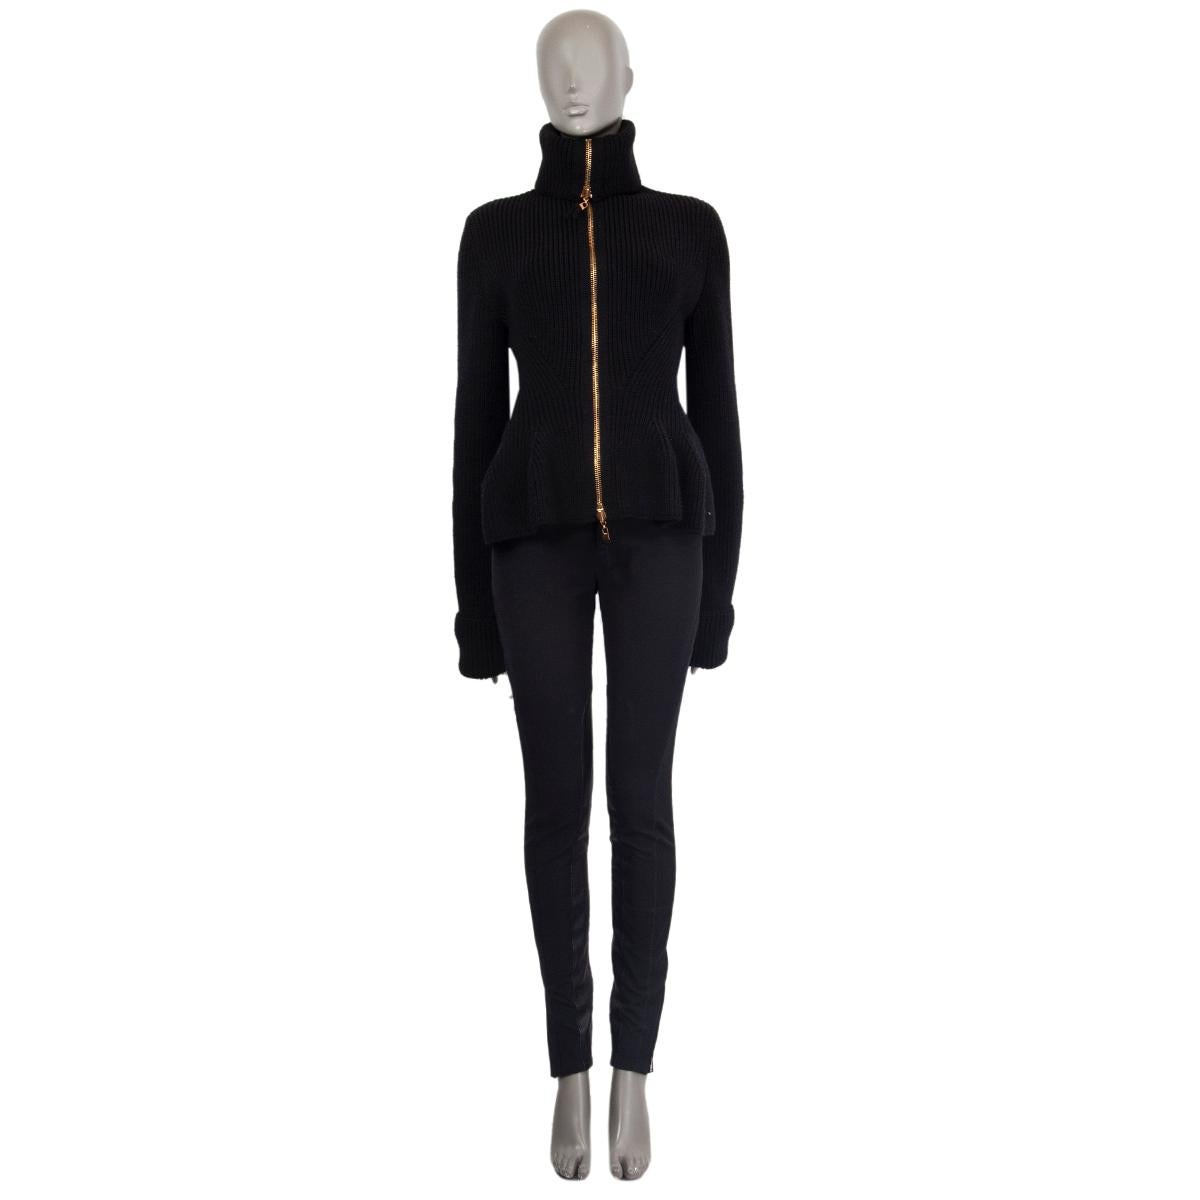 Alexander McQueen knit jacket in black wool (100%) with a long collar to fold down, close silhouette, peplum design, medium to heavy weight, long sleeves with folded cuffs. Unlined. Closes with a golden zipper in the front. Has been worn and is in